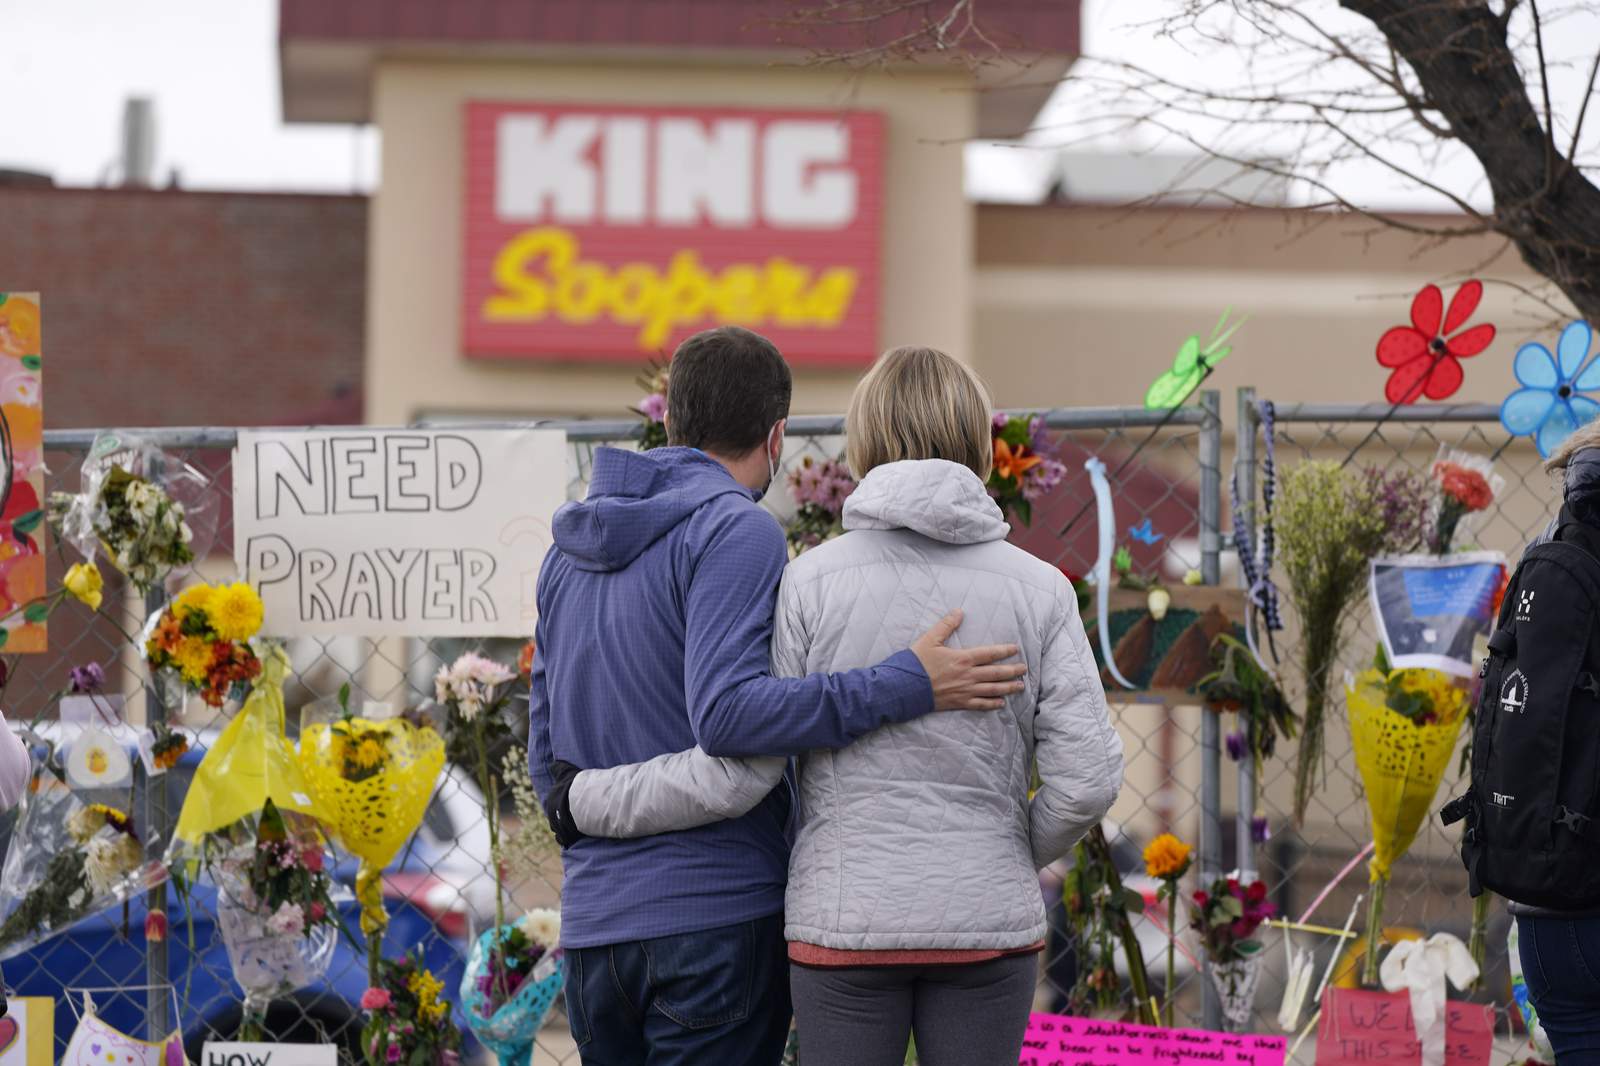 Colorado shooting suspect passed check in legal gun purchase